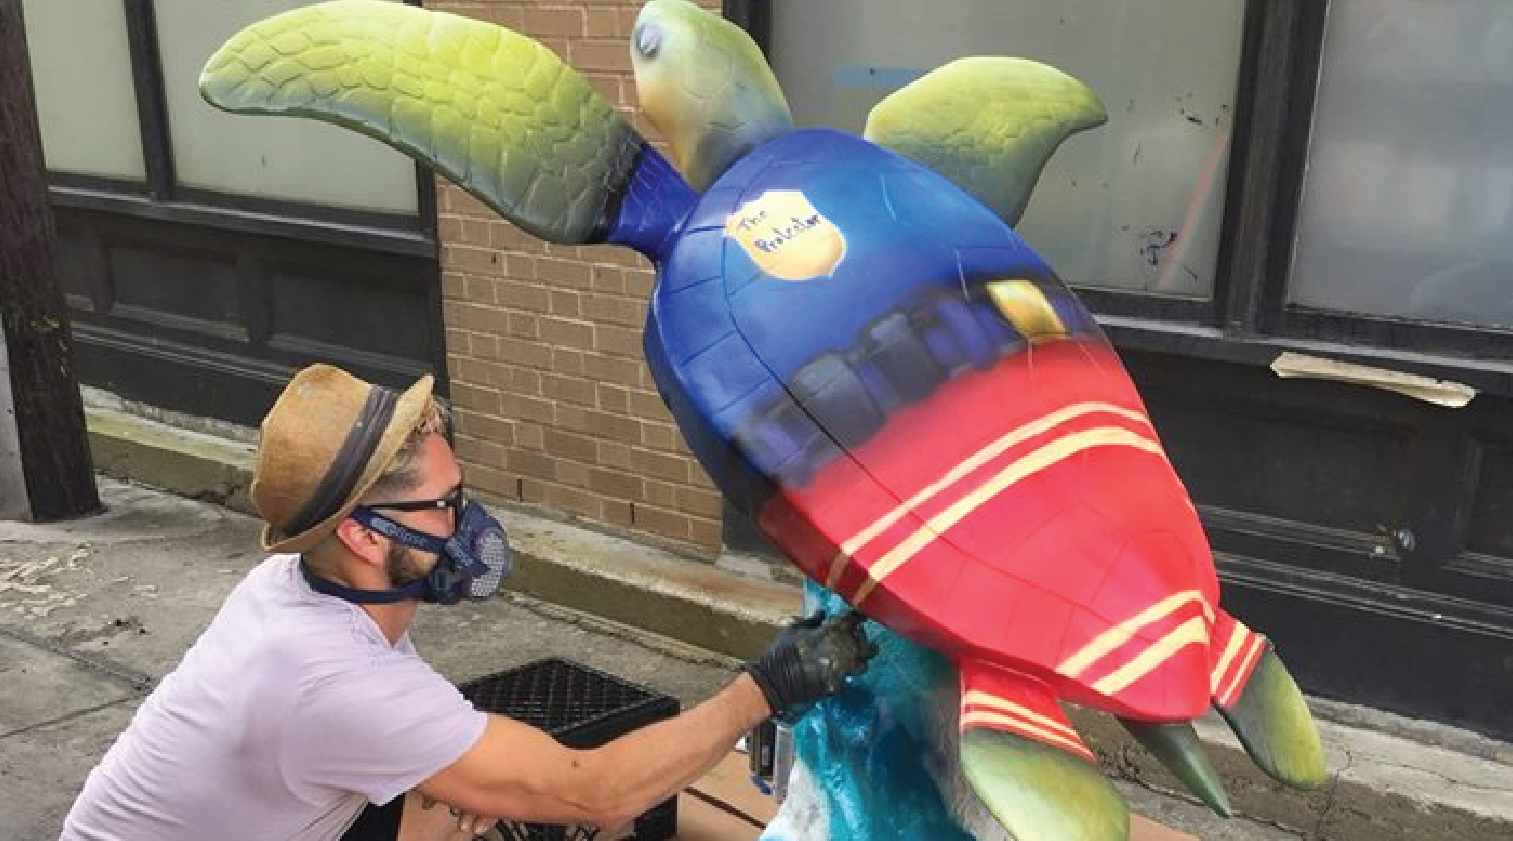 There Will Soon Be “Turtles About Town” With Galveston’s Next Venture into Public Art